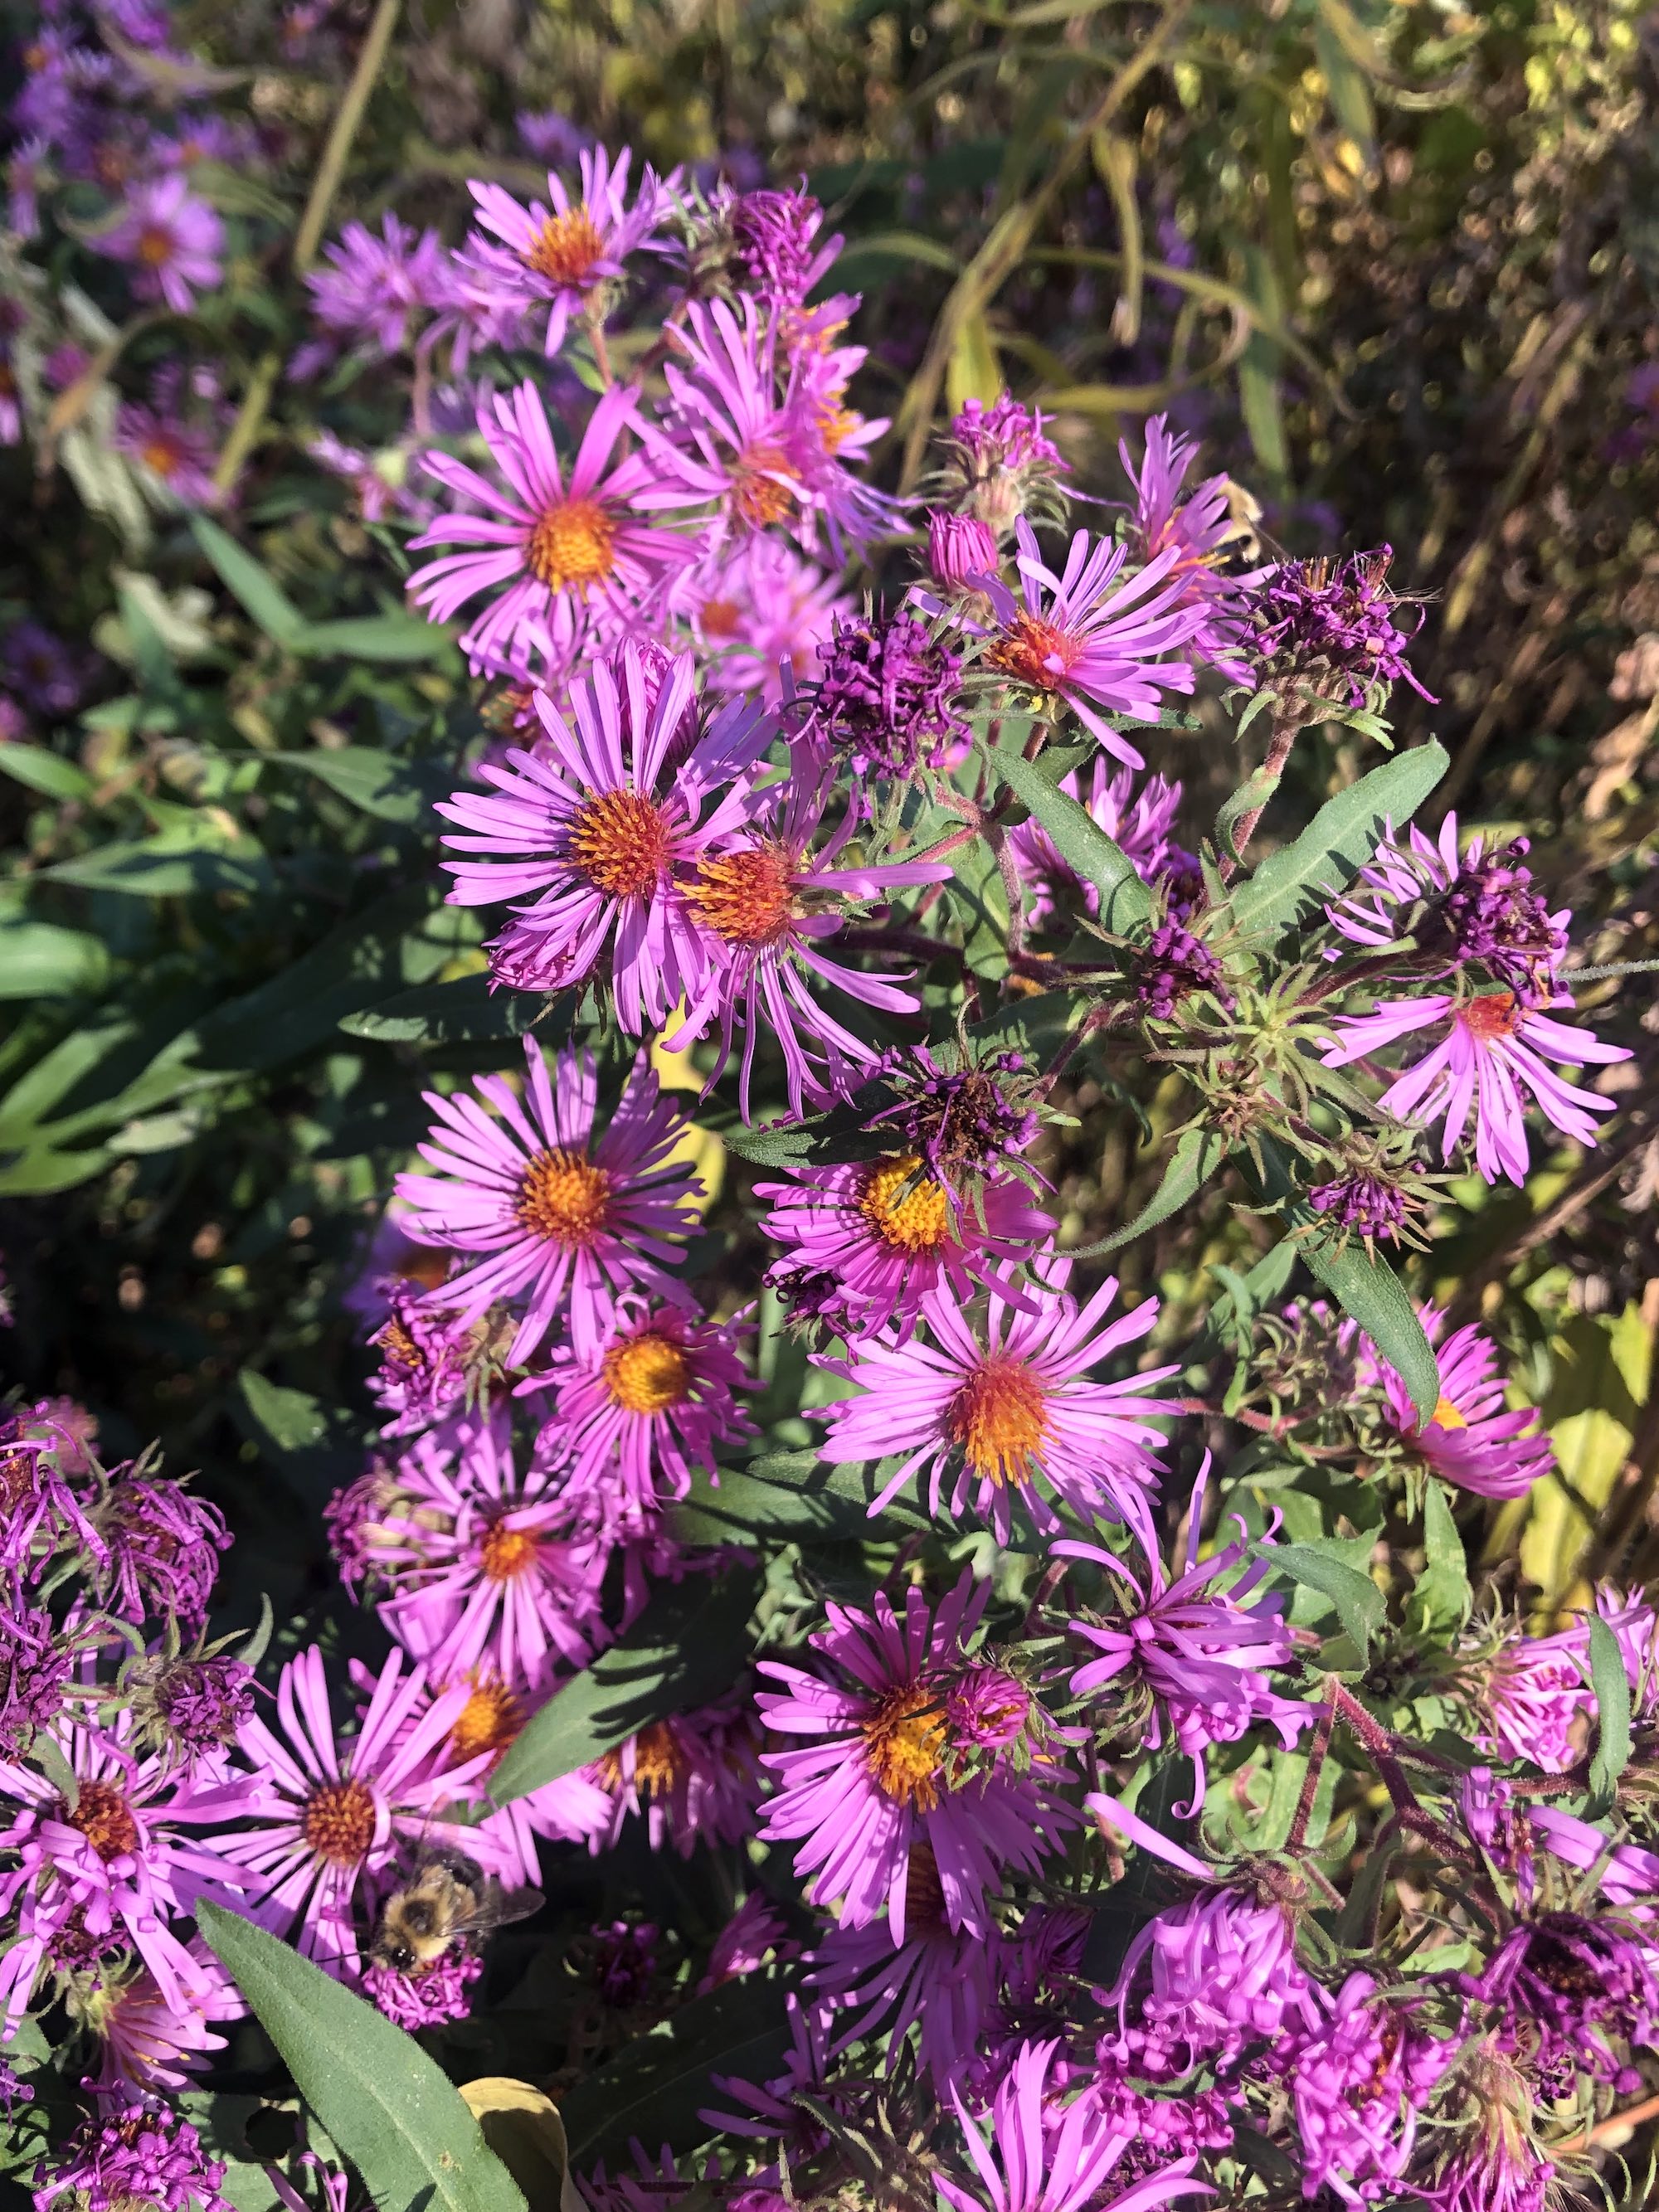 New England Aster on the bike path behind Gregory Street in Madison, Wisconsin on October 23, 2022.